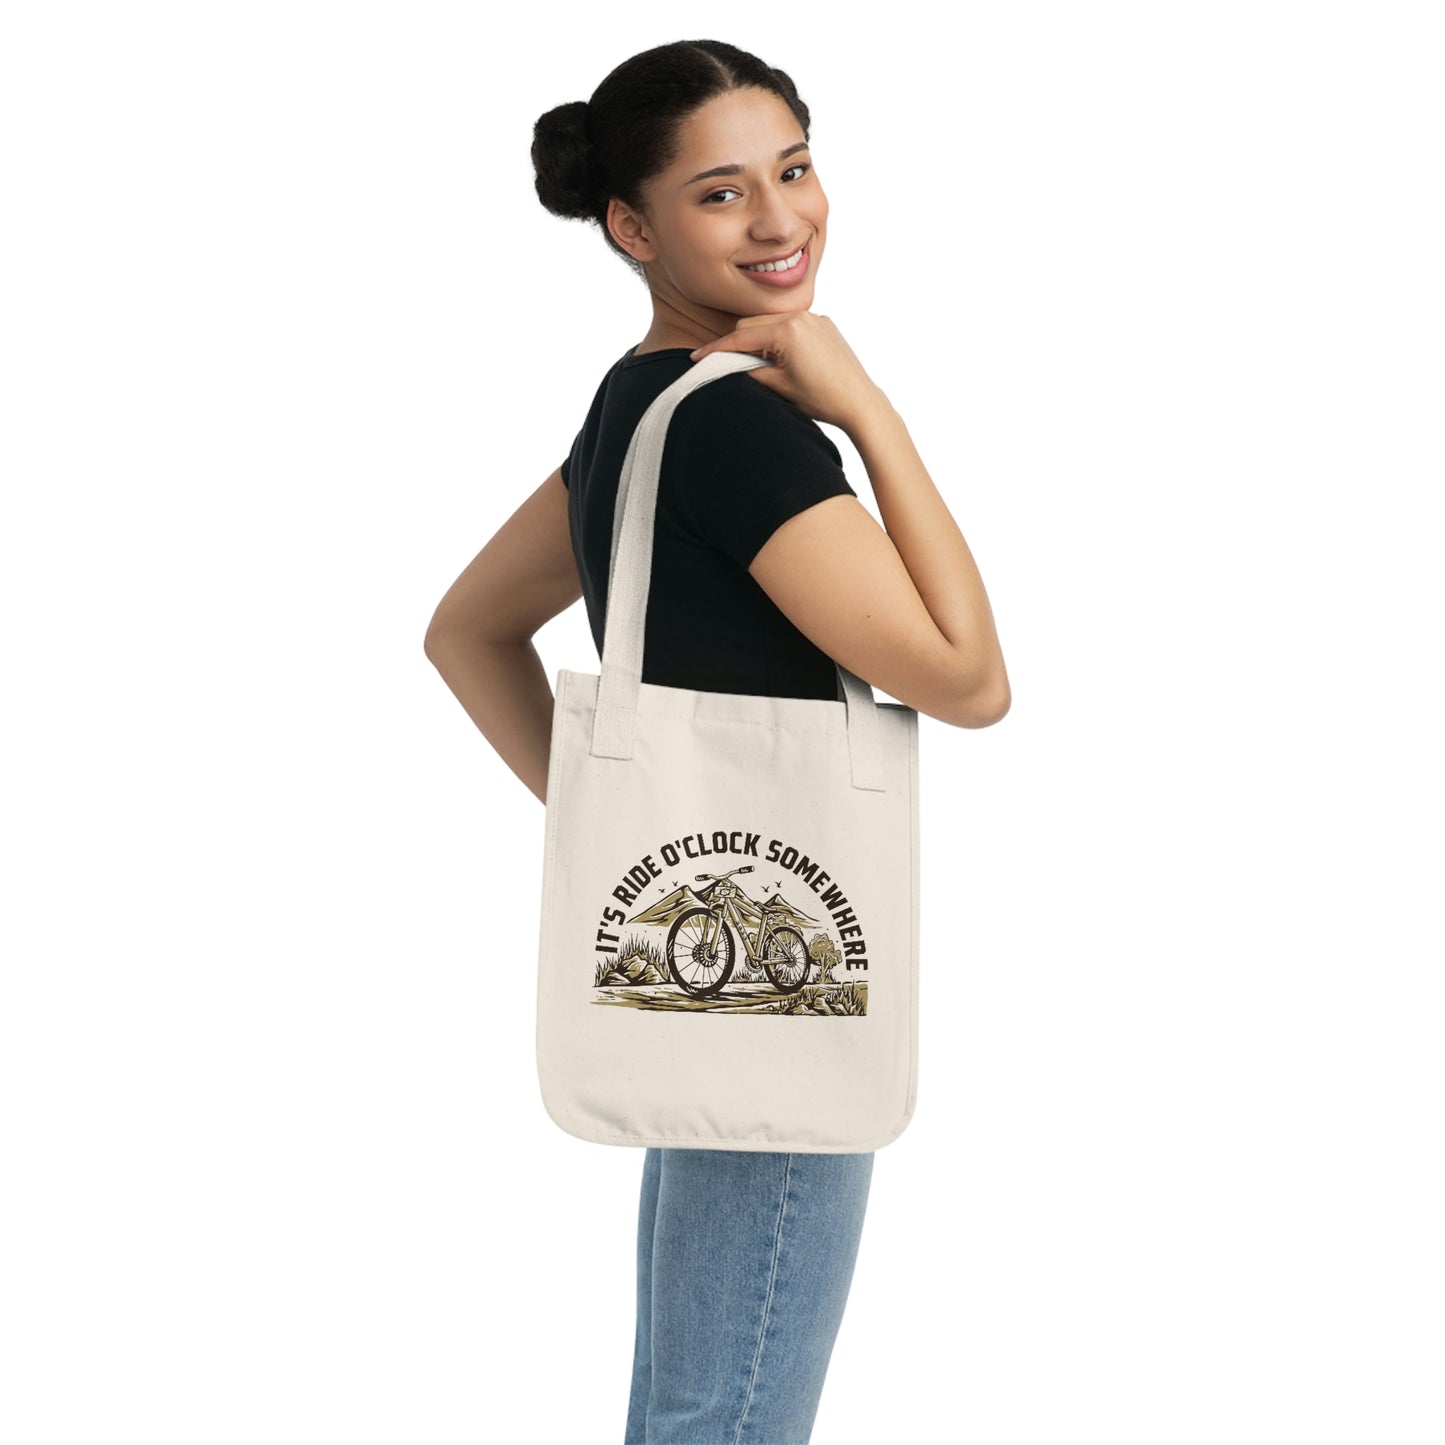 2023 529 Garage Limited Edition "It's ride o'clock somewhere" Organic Canvas Tote Bag